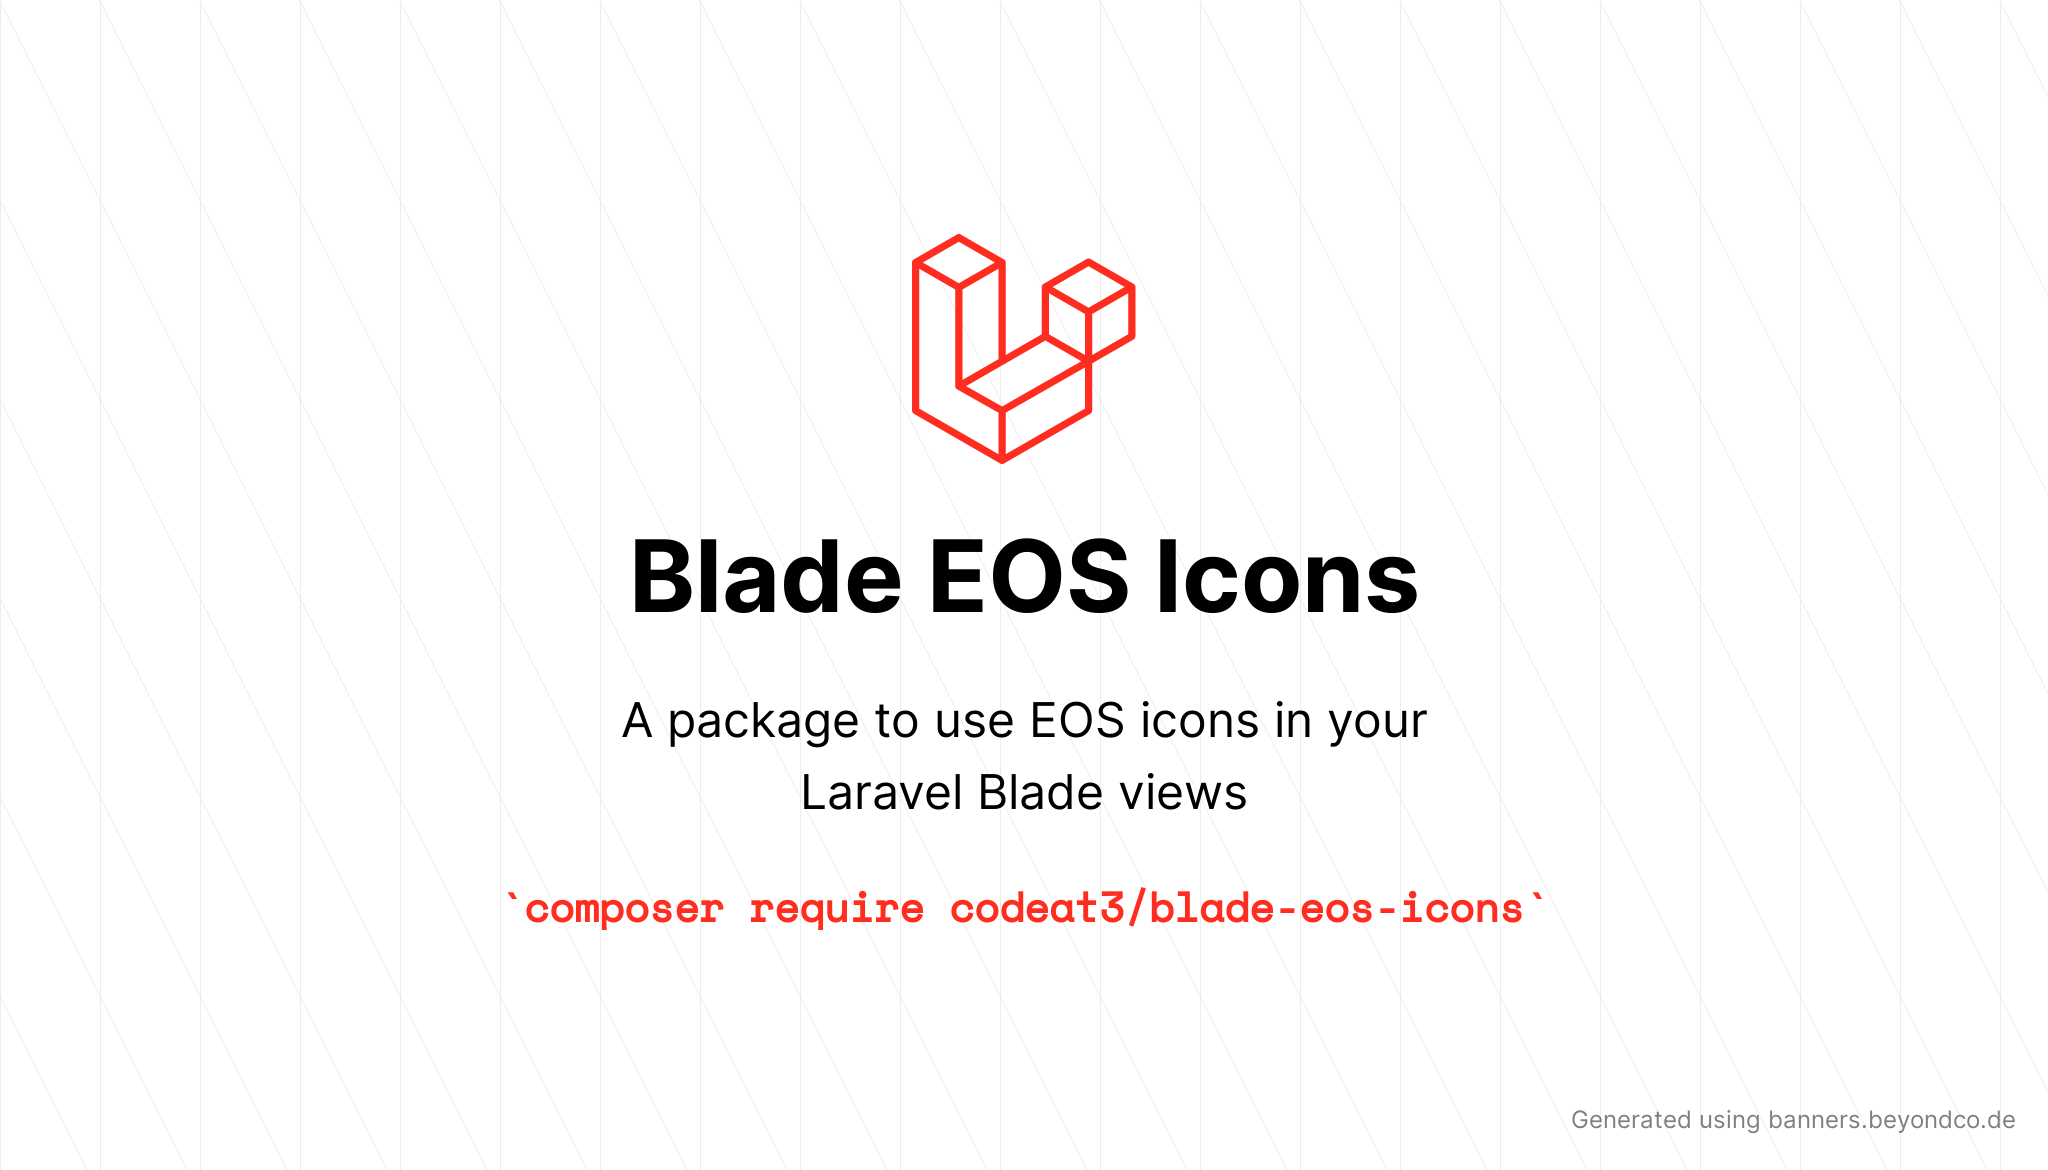 socialcard-blade-eos-icons.png